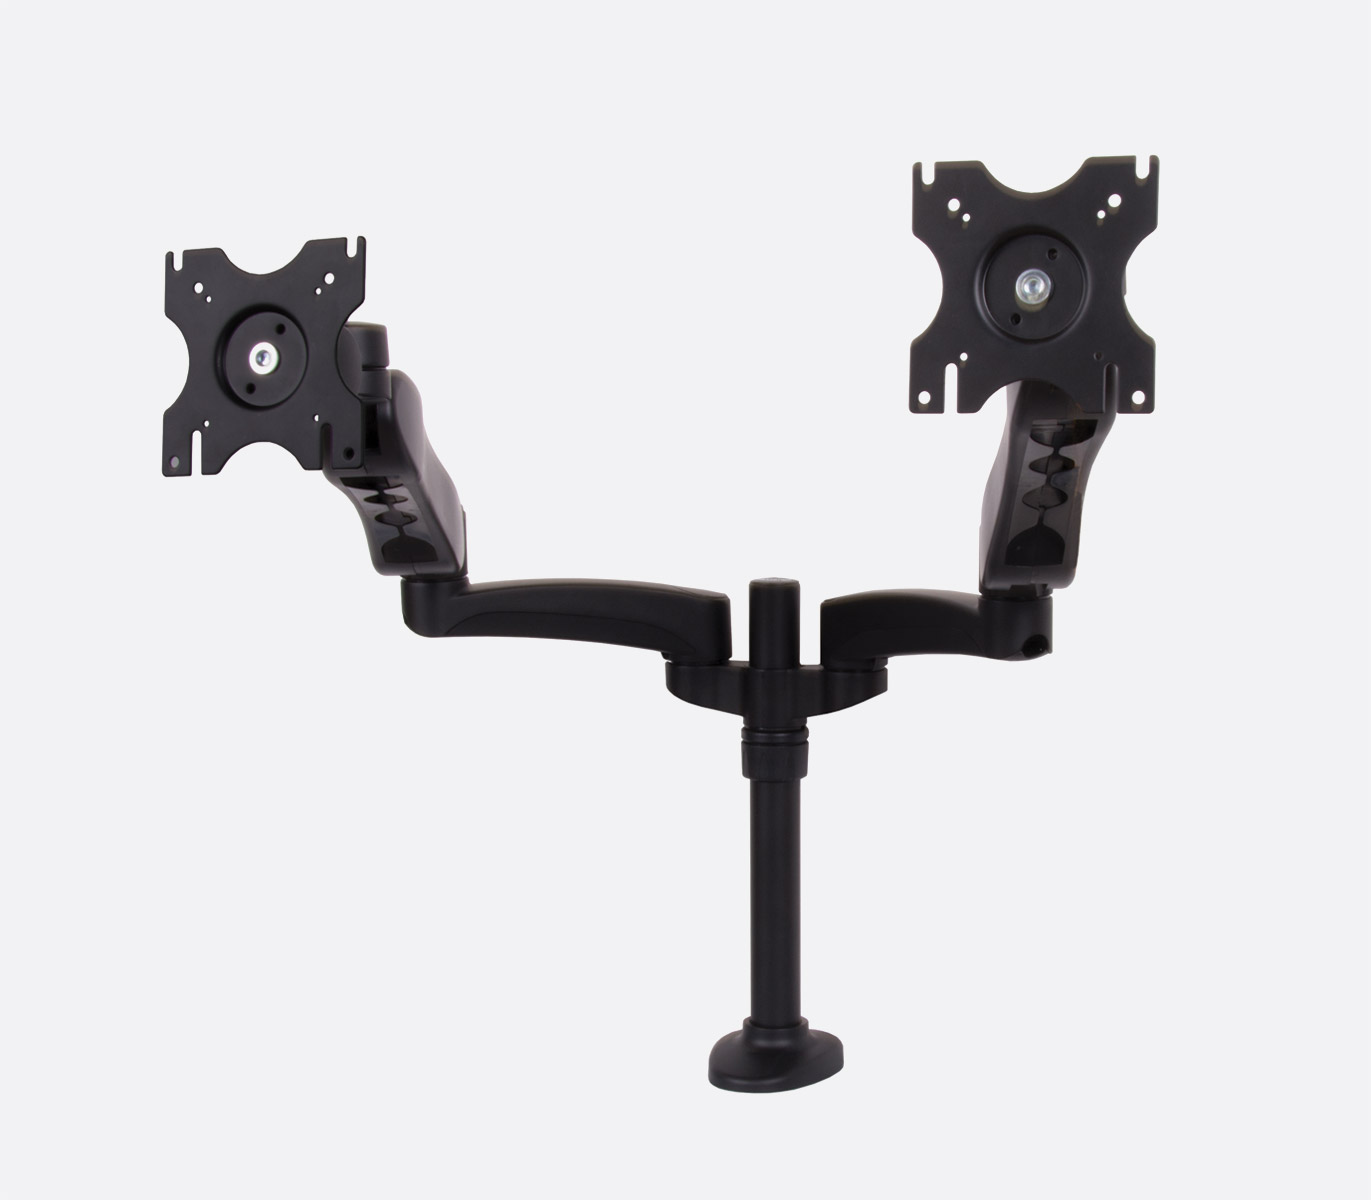 Dual Monitor Desk Stand w/ Articulating Arms – Mount-It!